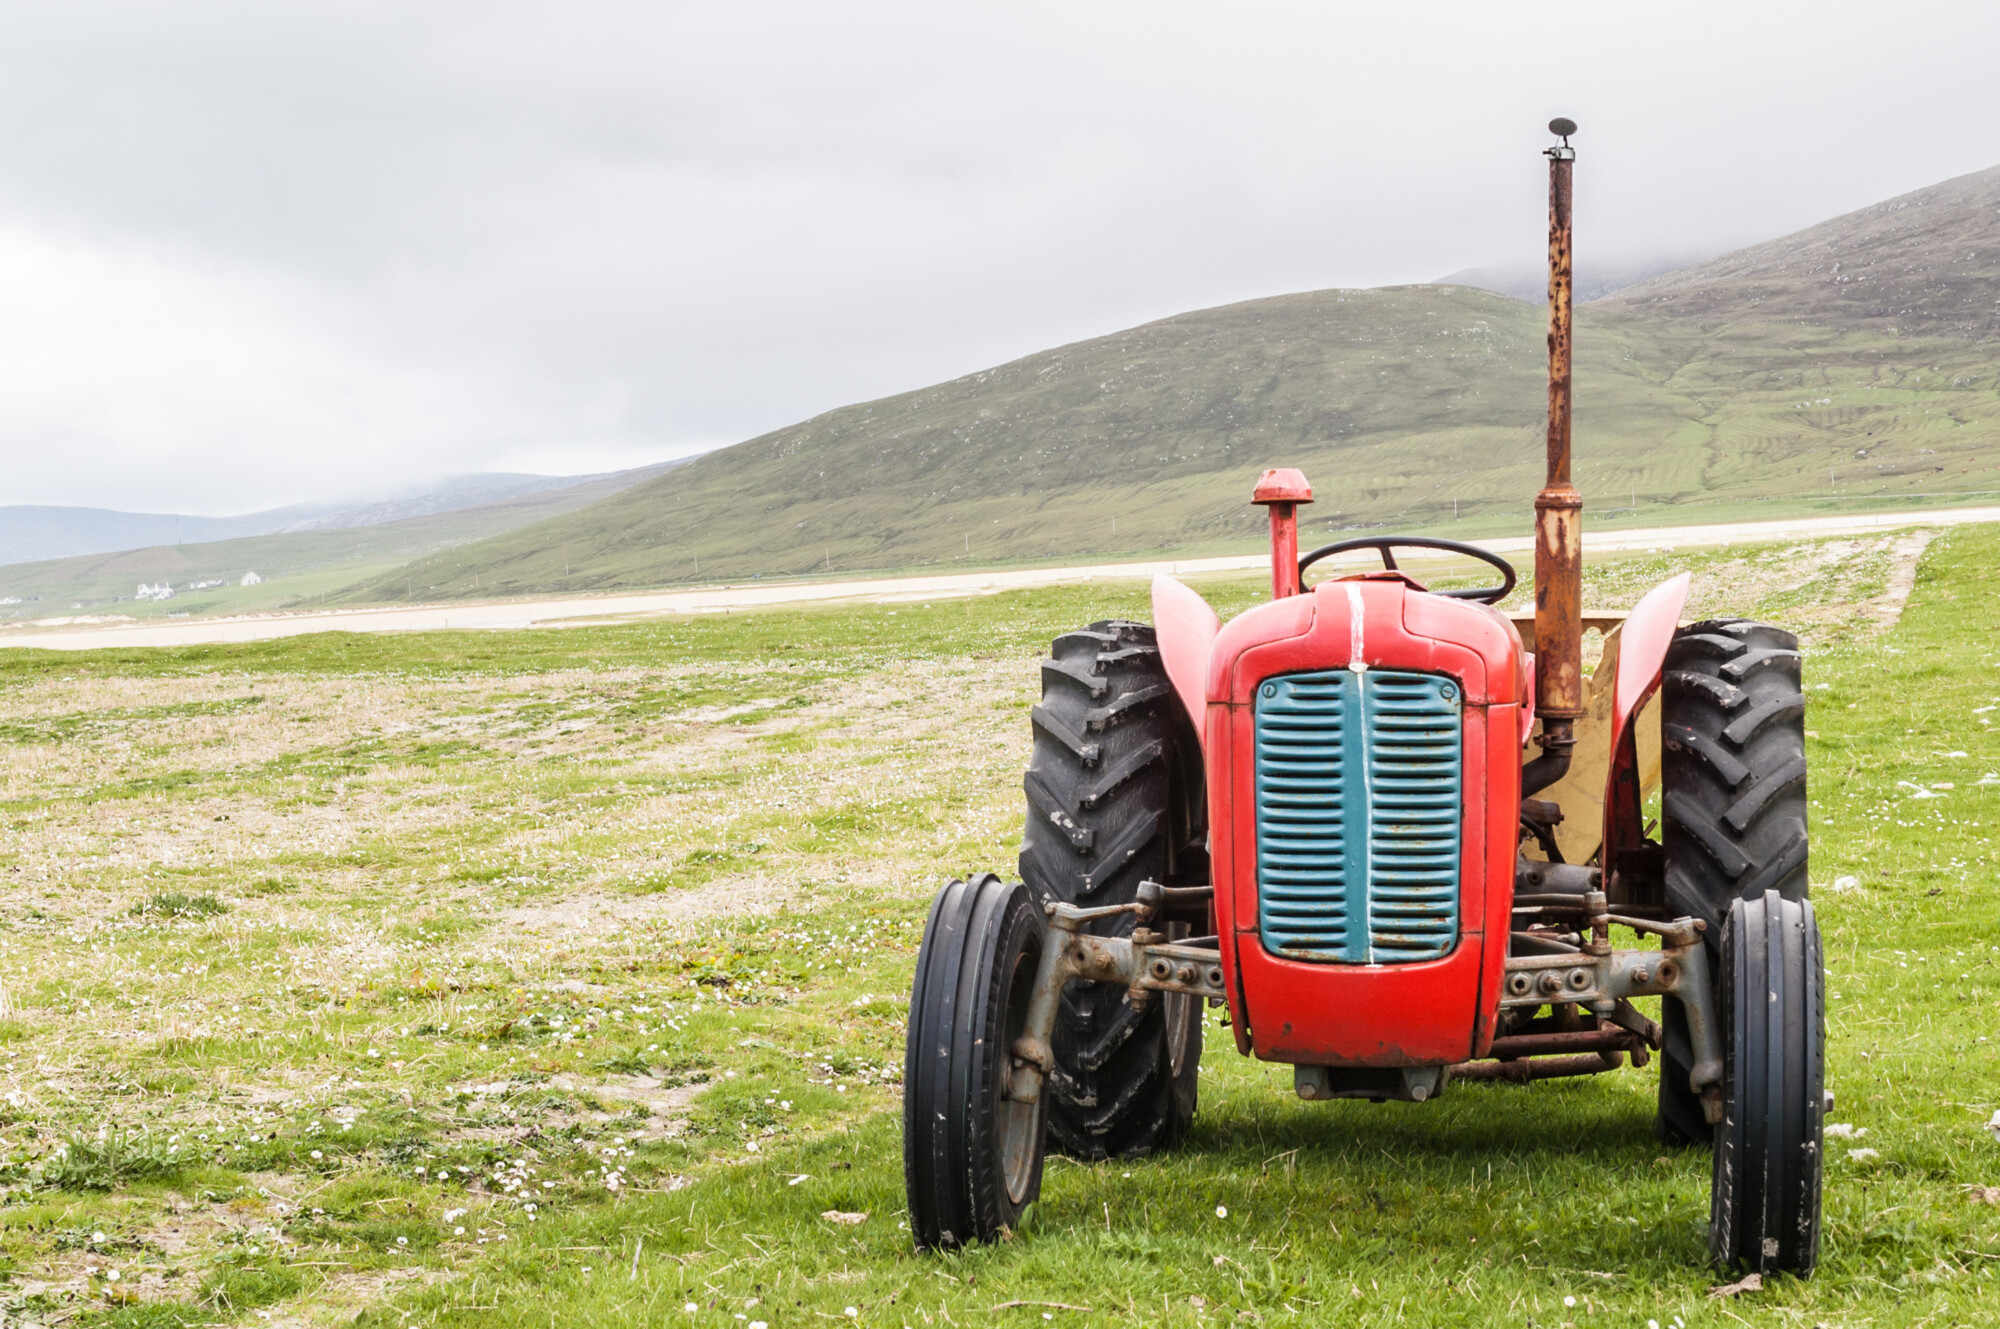 Red Tractor revises its standards after member feedback - Farmers Guide